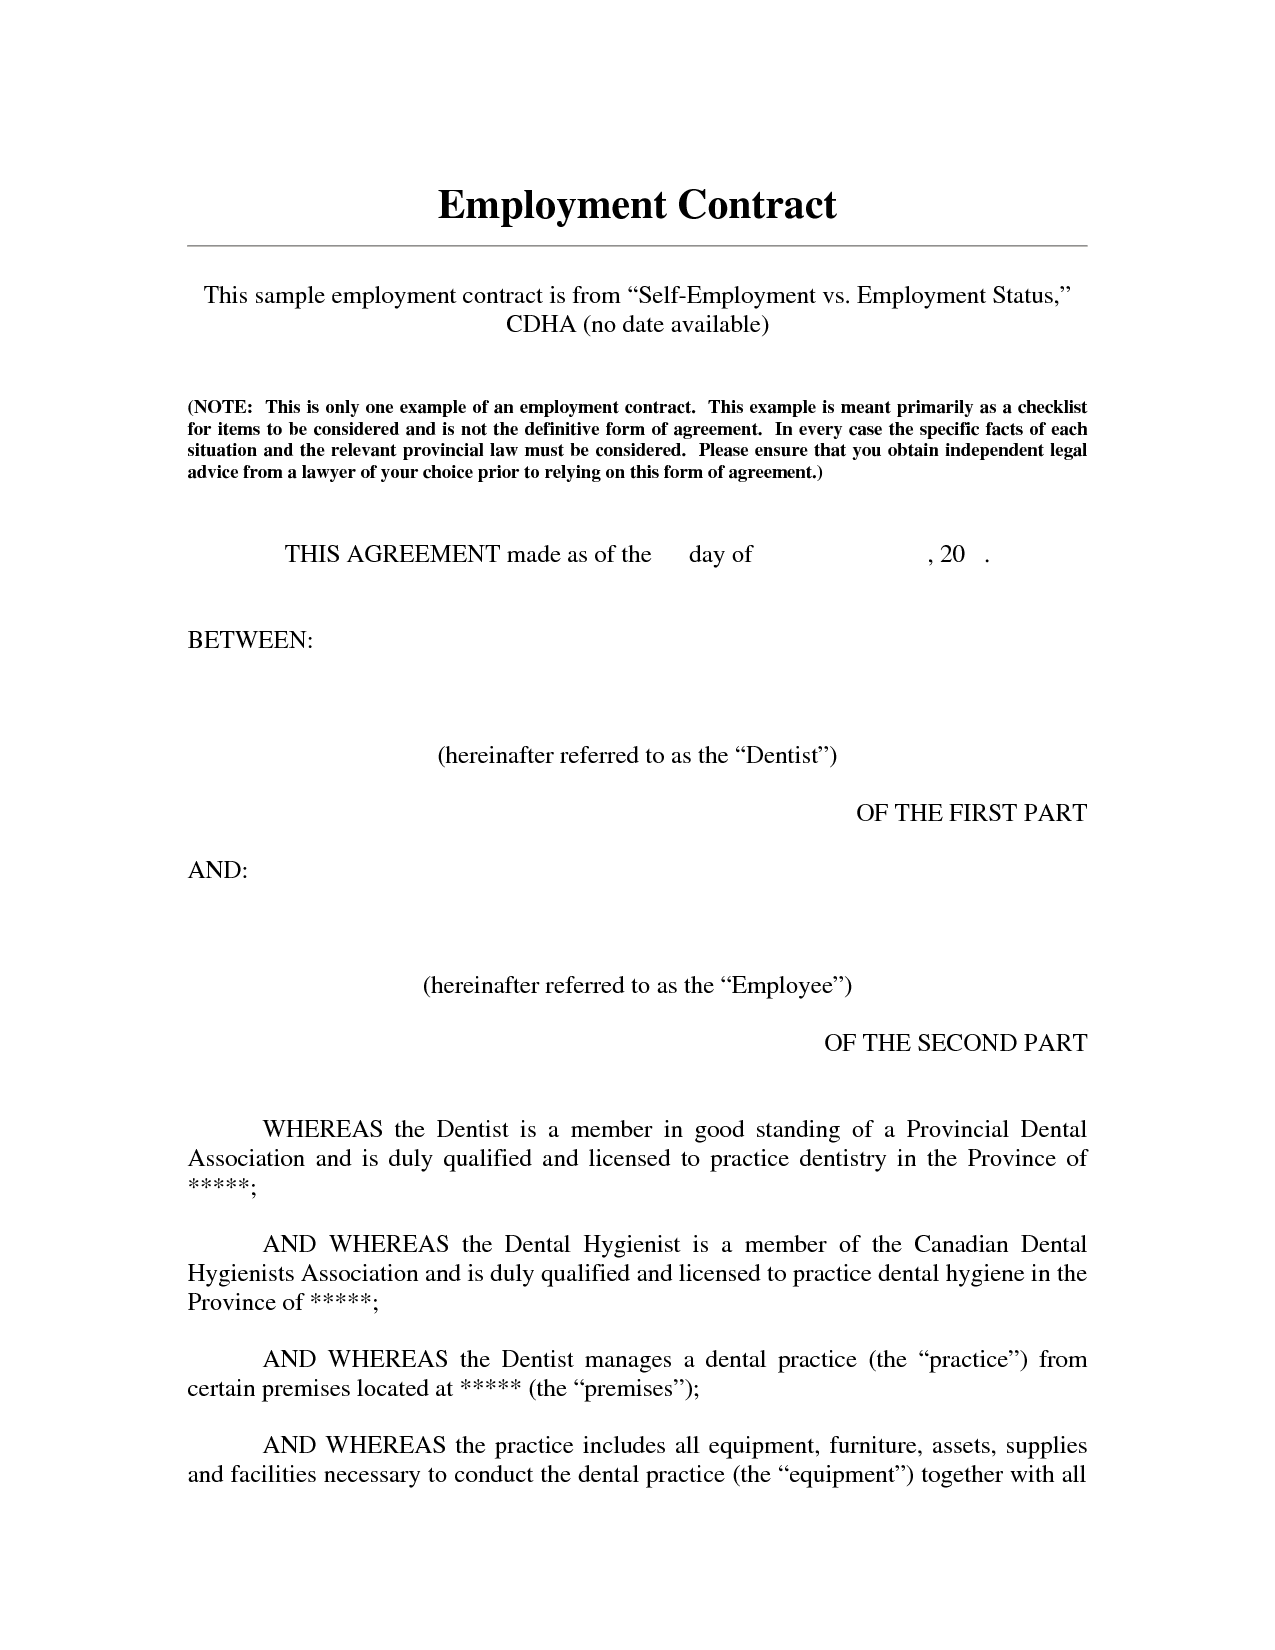 commercial photography job contract template